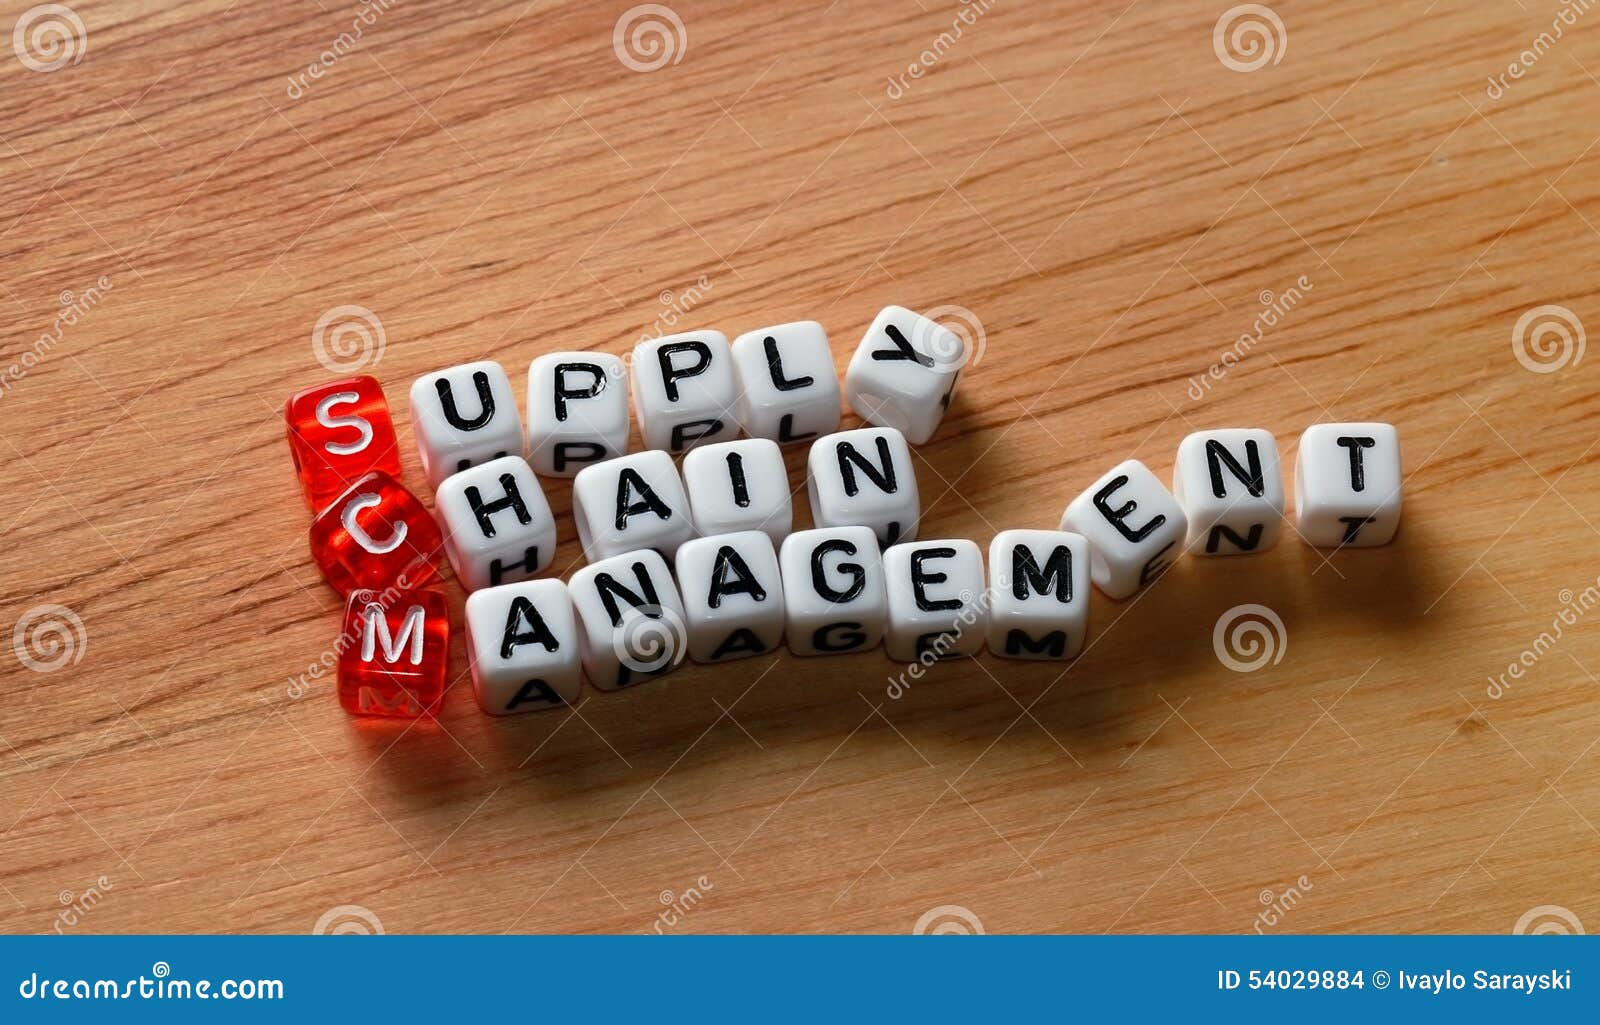 scm supply chain management on wood